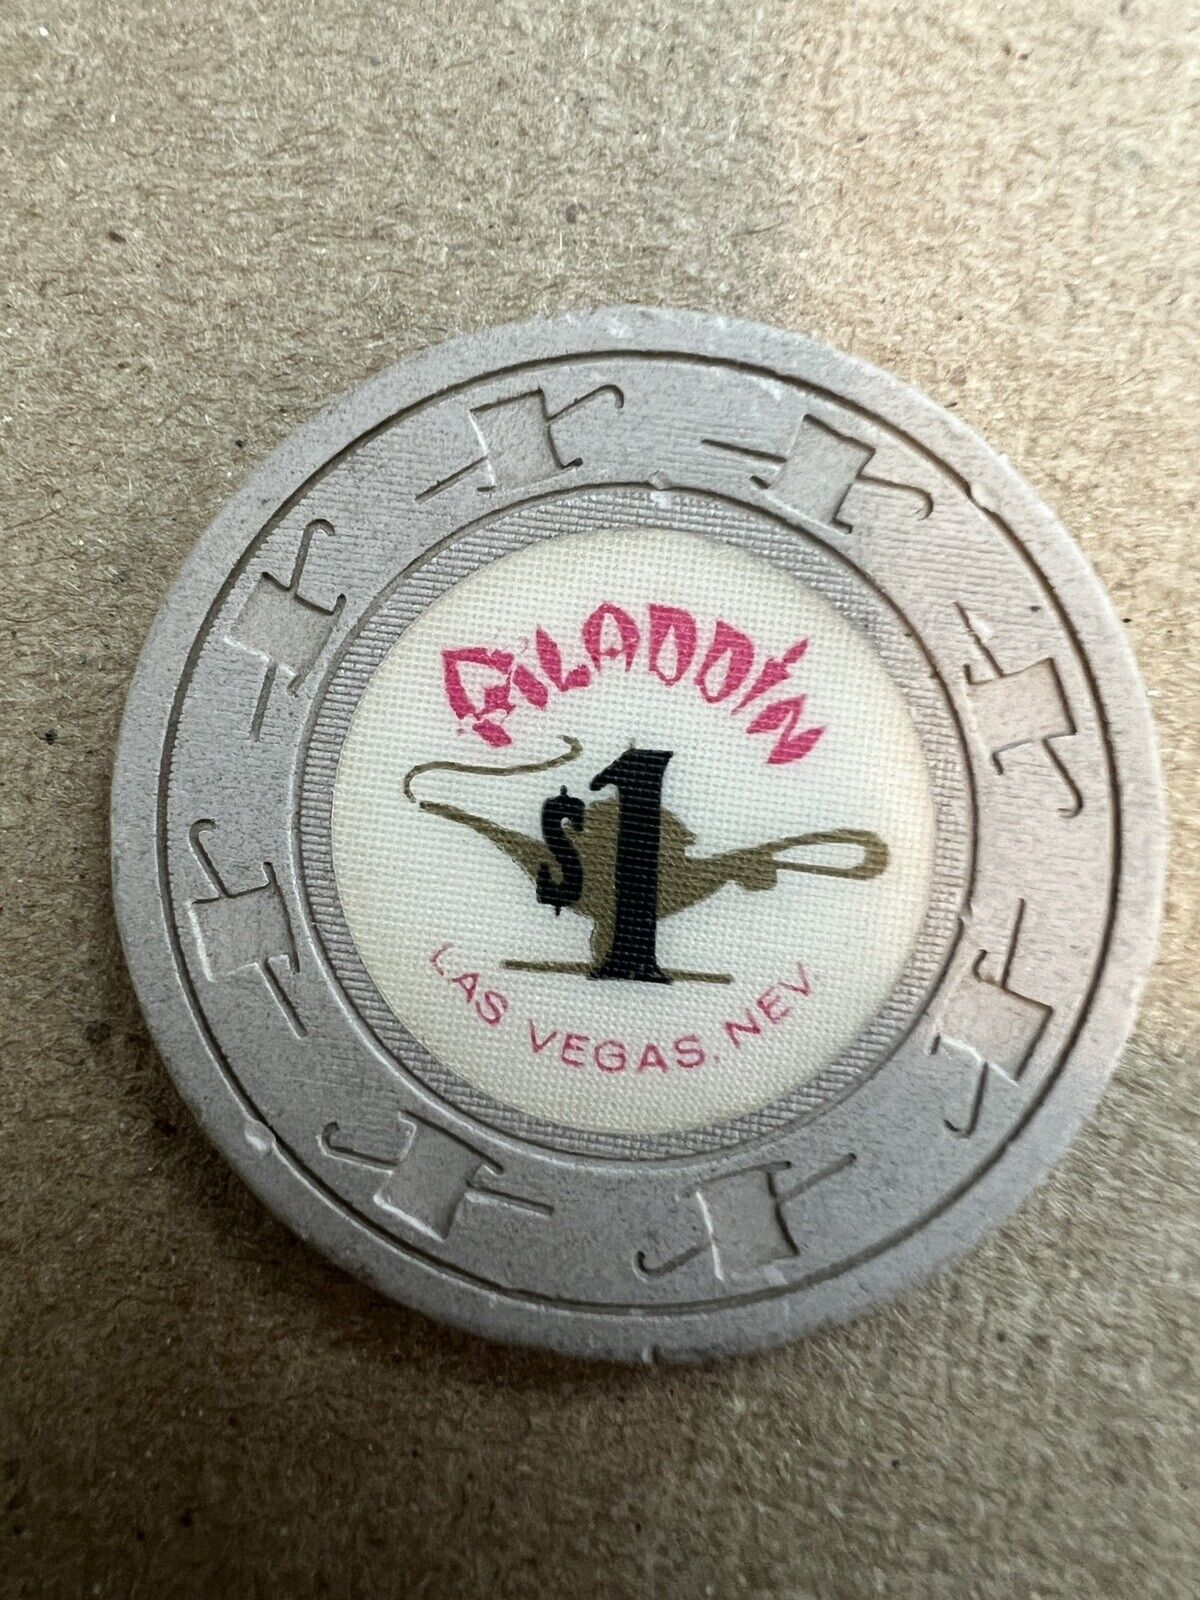 Obsolete $1 chip from the closed Aladdin in Las Vegas